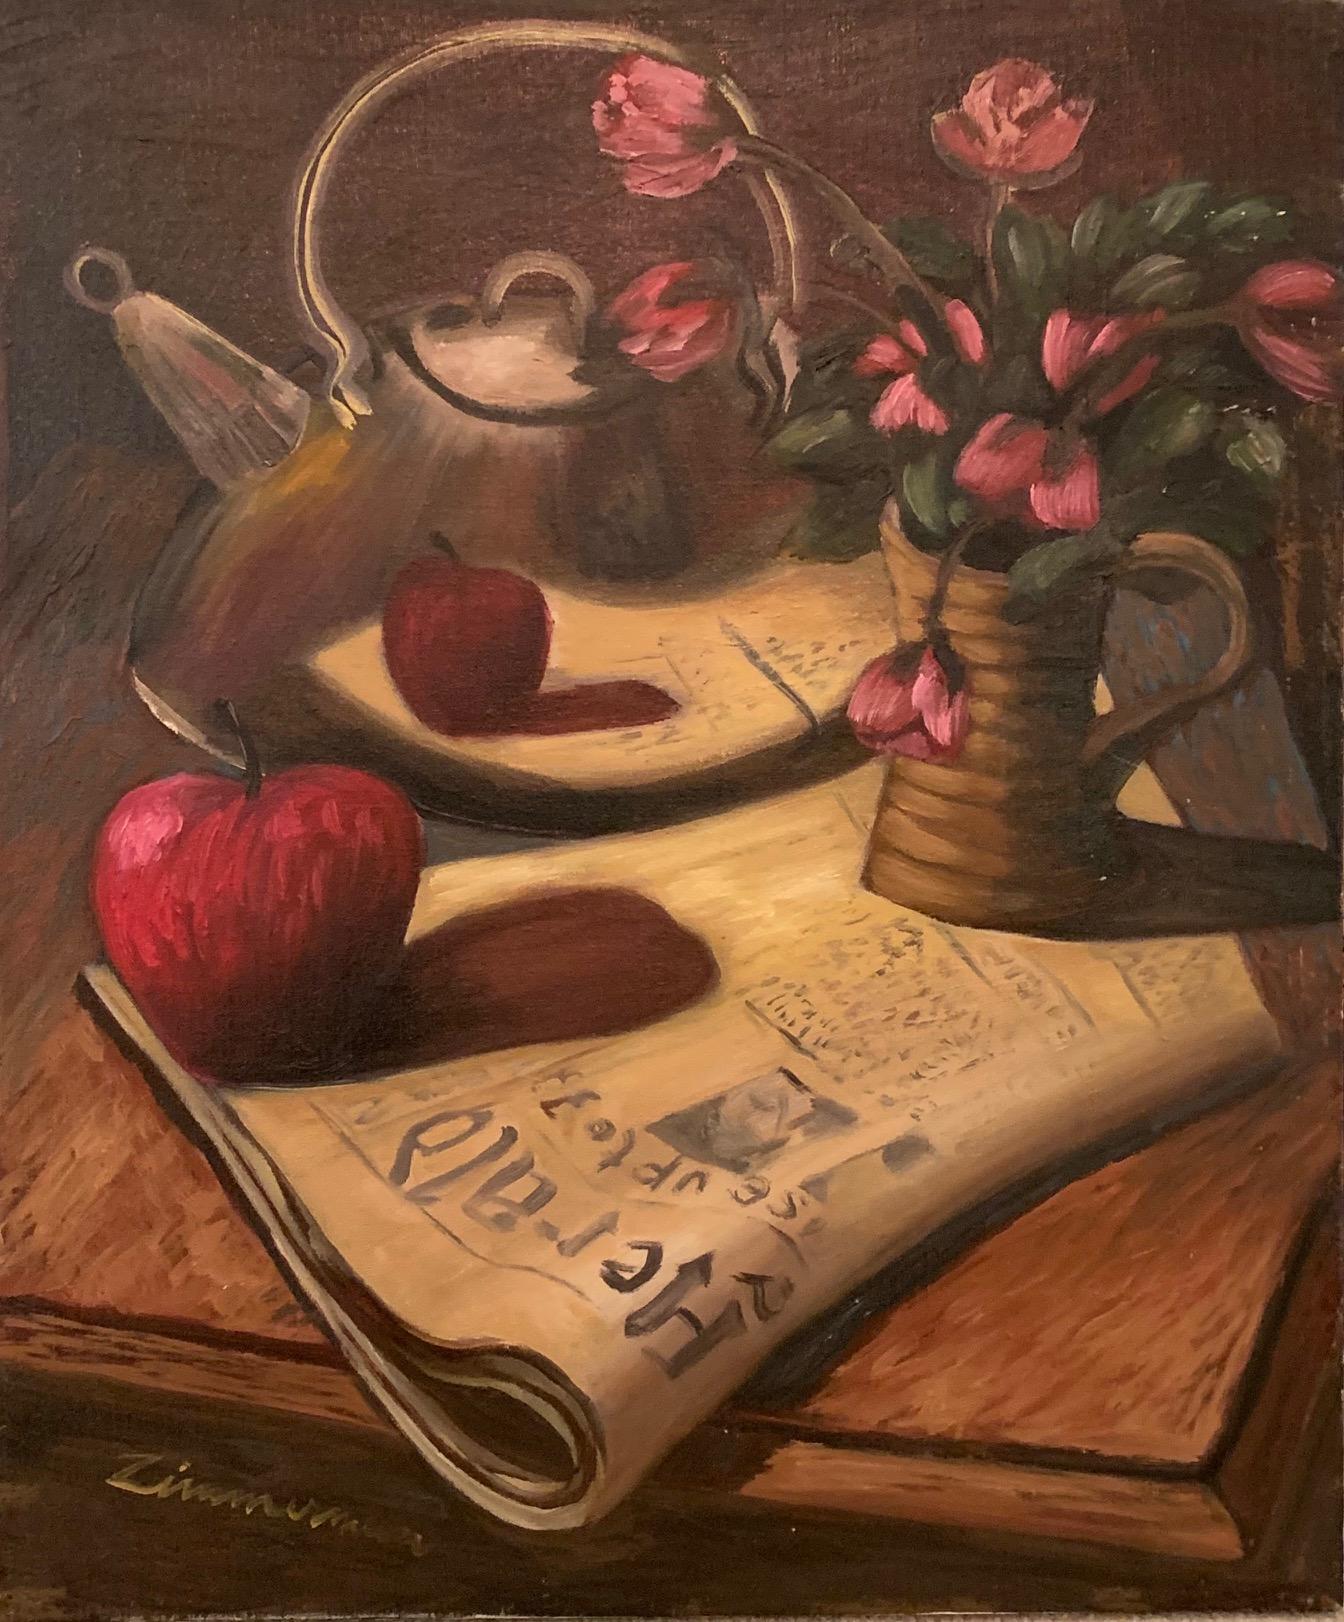 « Still life with a newspaper », huile sur toile, huile sur toile - Painting de Unknown